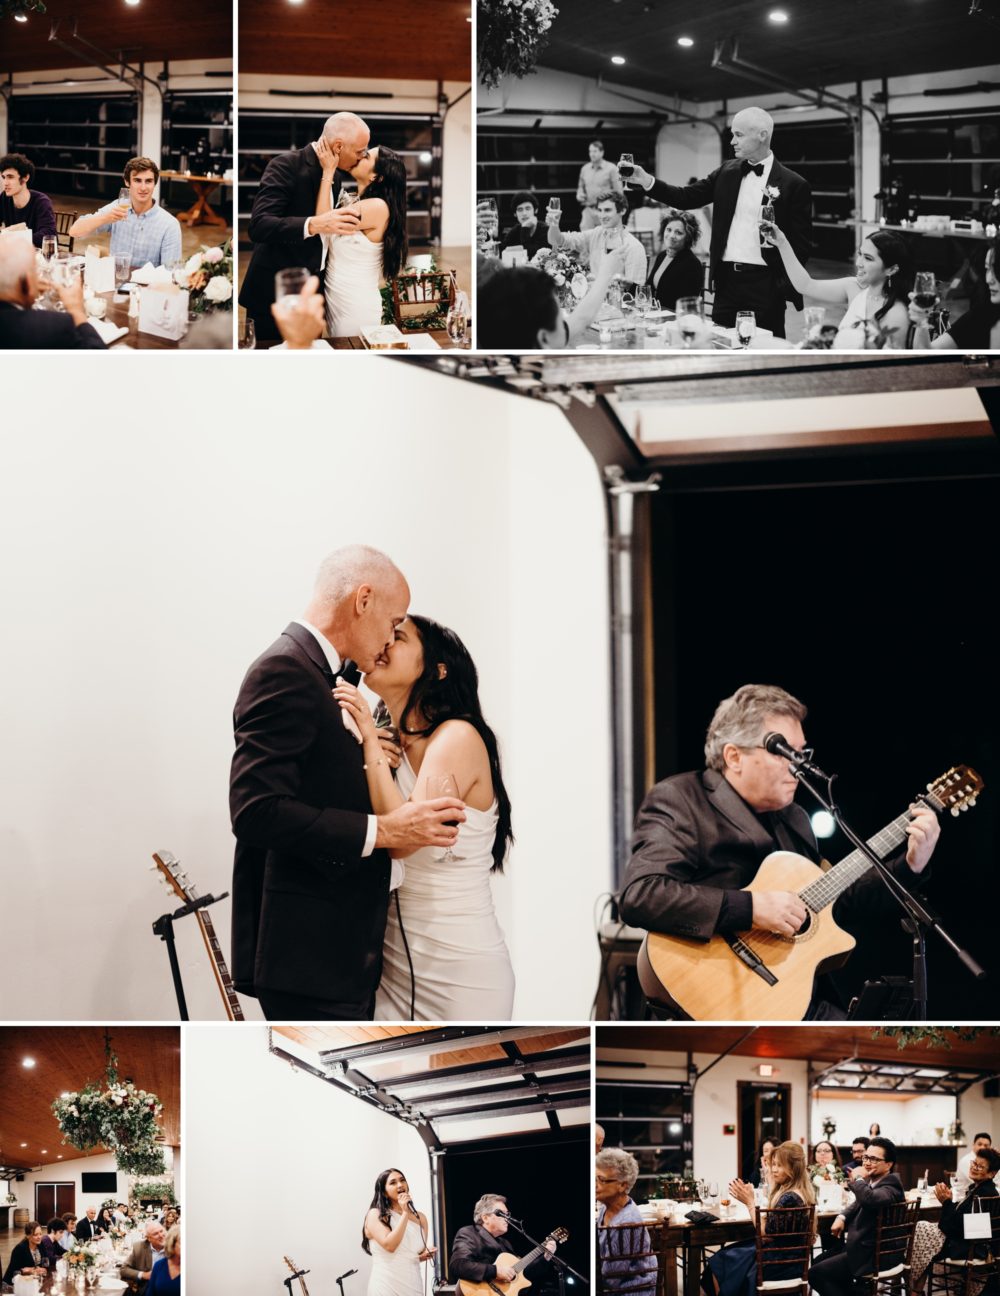 The bride sings to her groom - by McMinnville Wedding Photographer, Briana Morrison